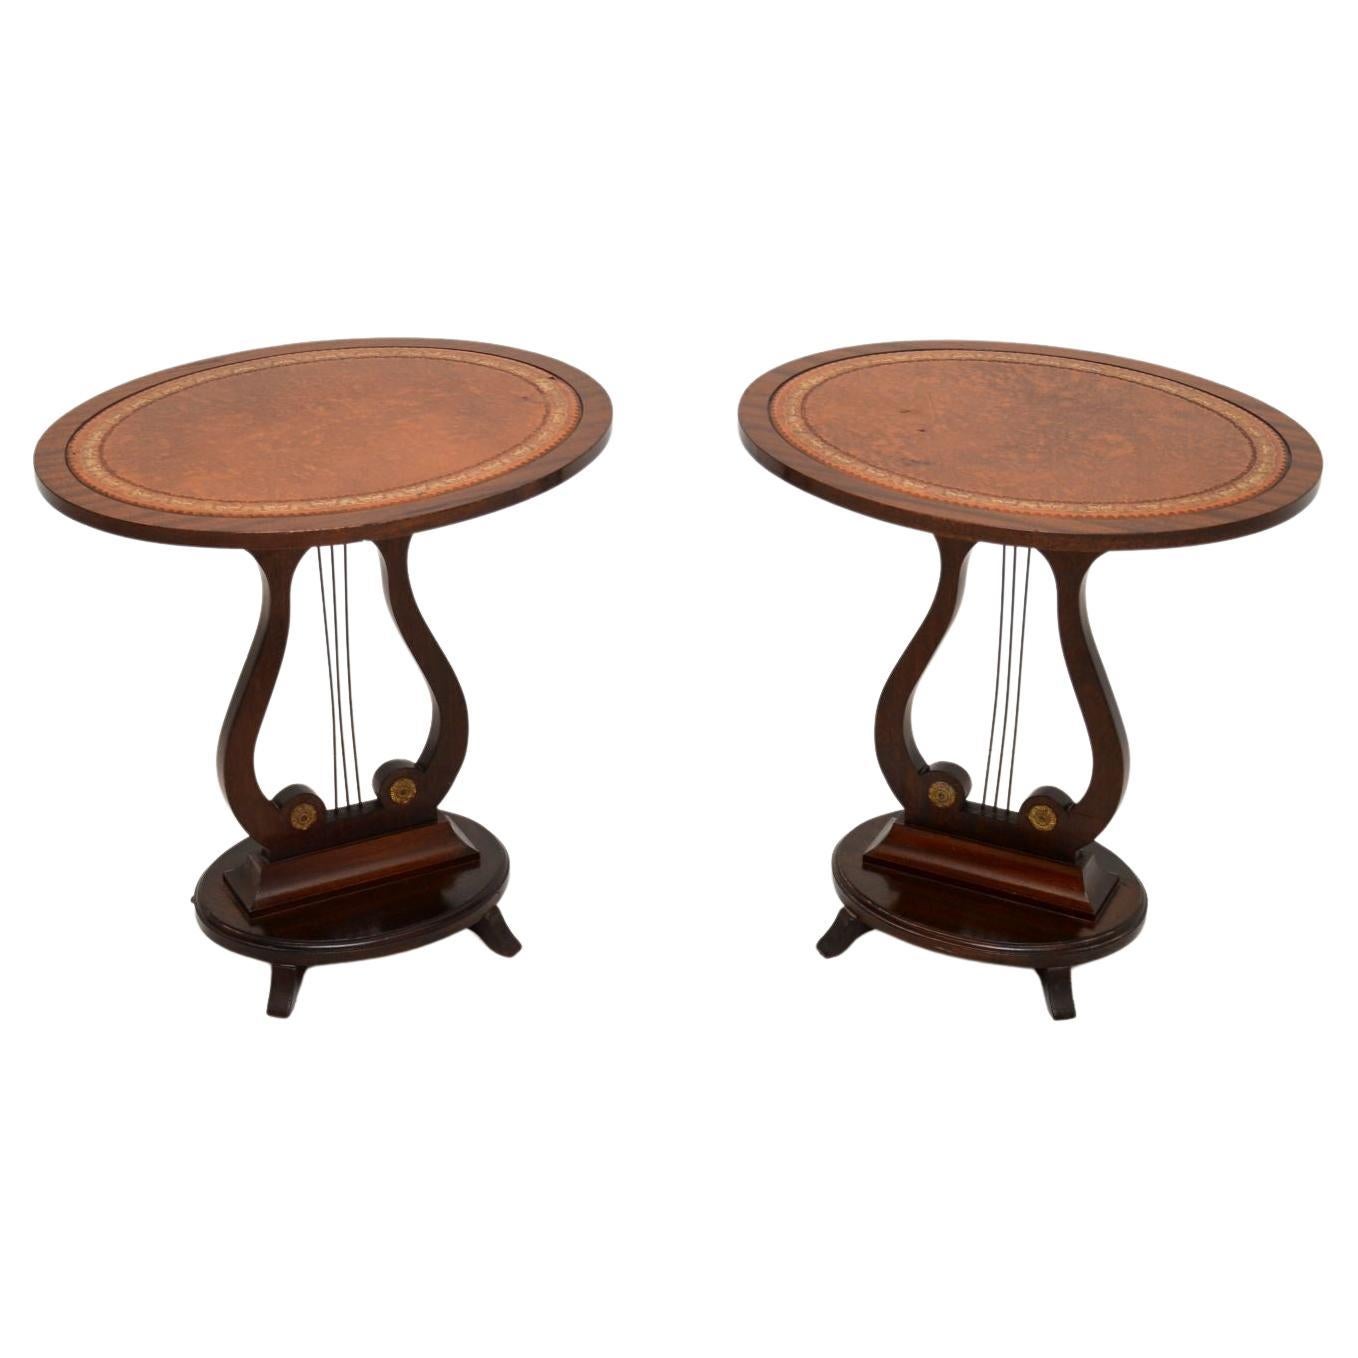 Pair of Antique Regency Style Side Tables